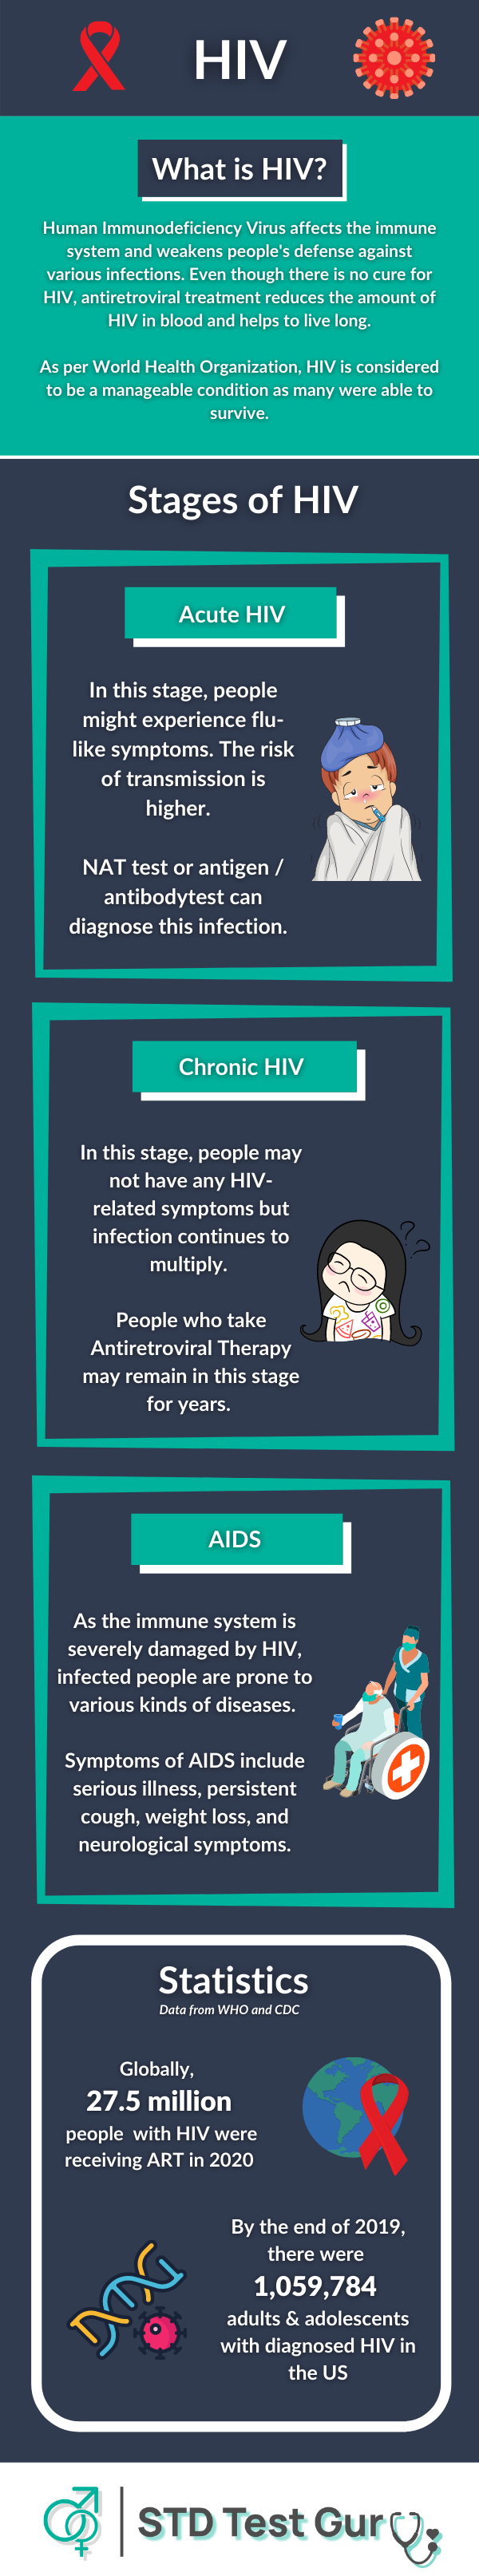 HIV Symptoms, Stages and Statistics